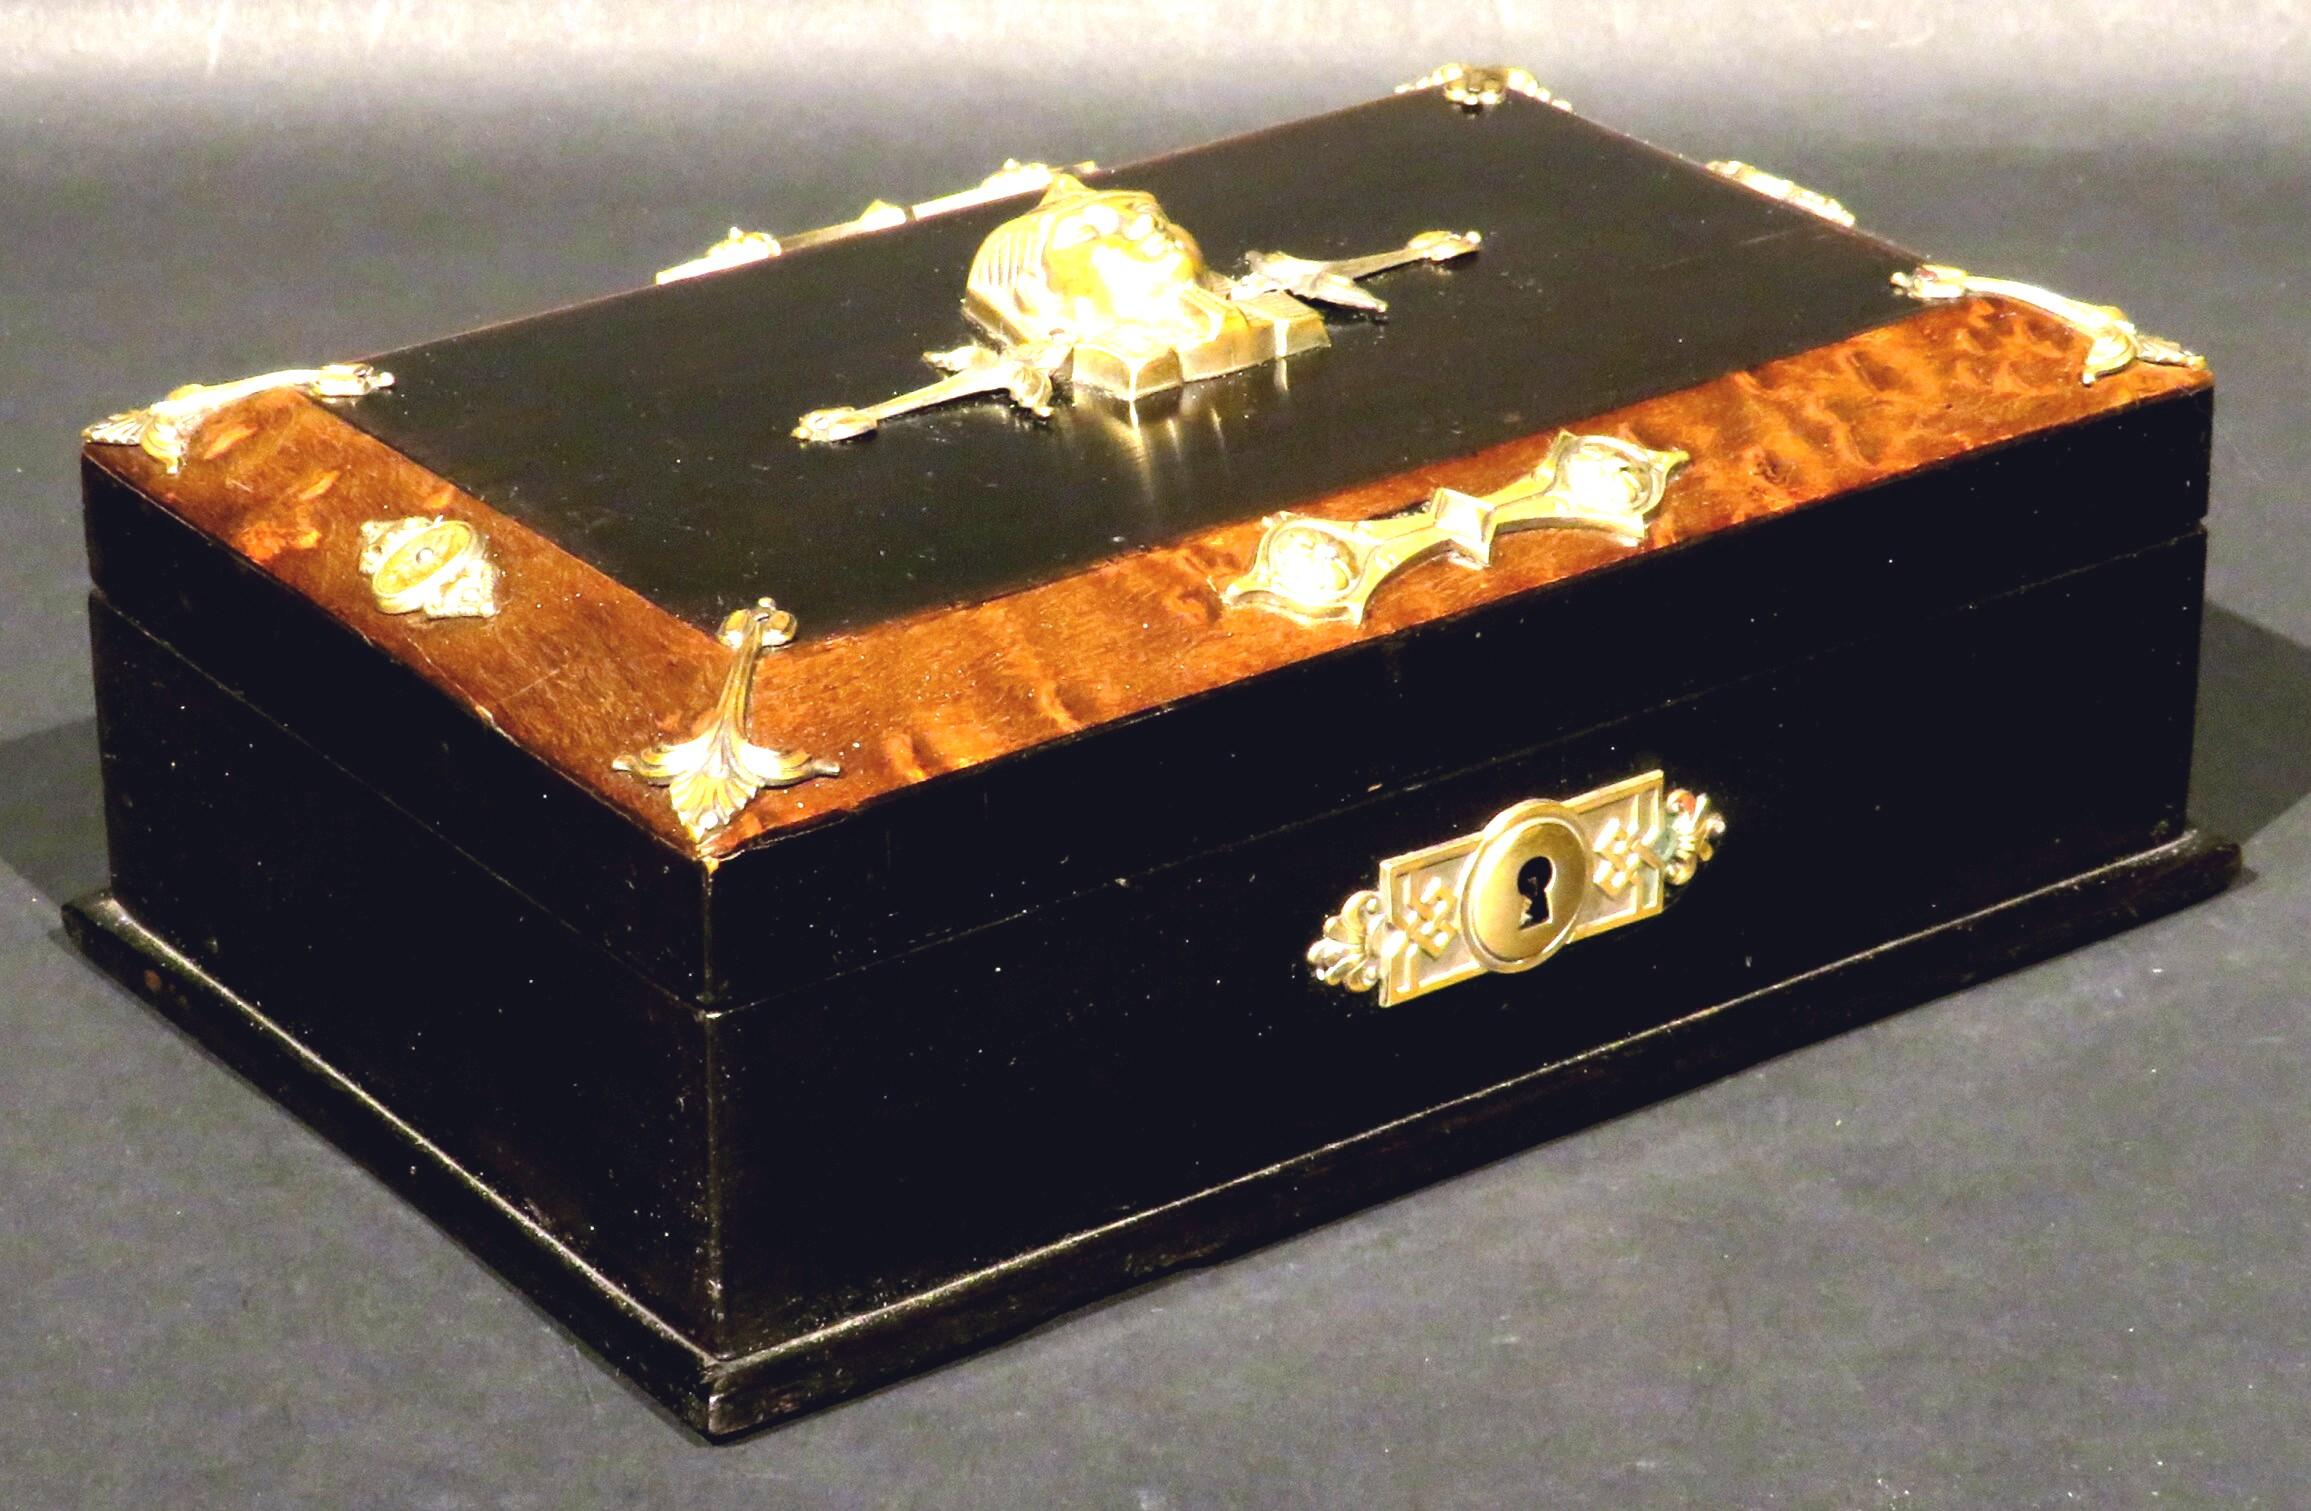 A highly decorative Egyptian Revival jewellery box or trinket box, the hinged & part ebonized lid featuring a finely detailed brass bust of an Egyptian Pharaoh, bordered within a burled & canted edge decorated with neoclassical brass appliques.